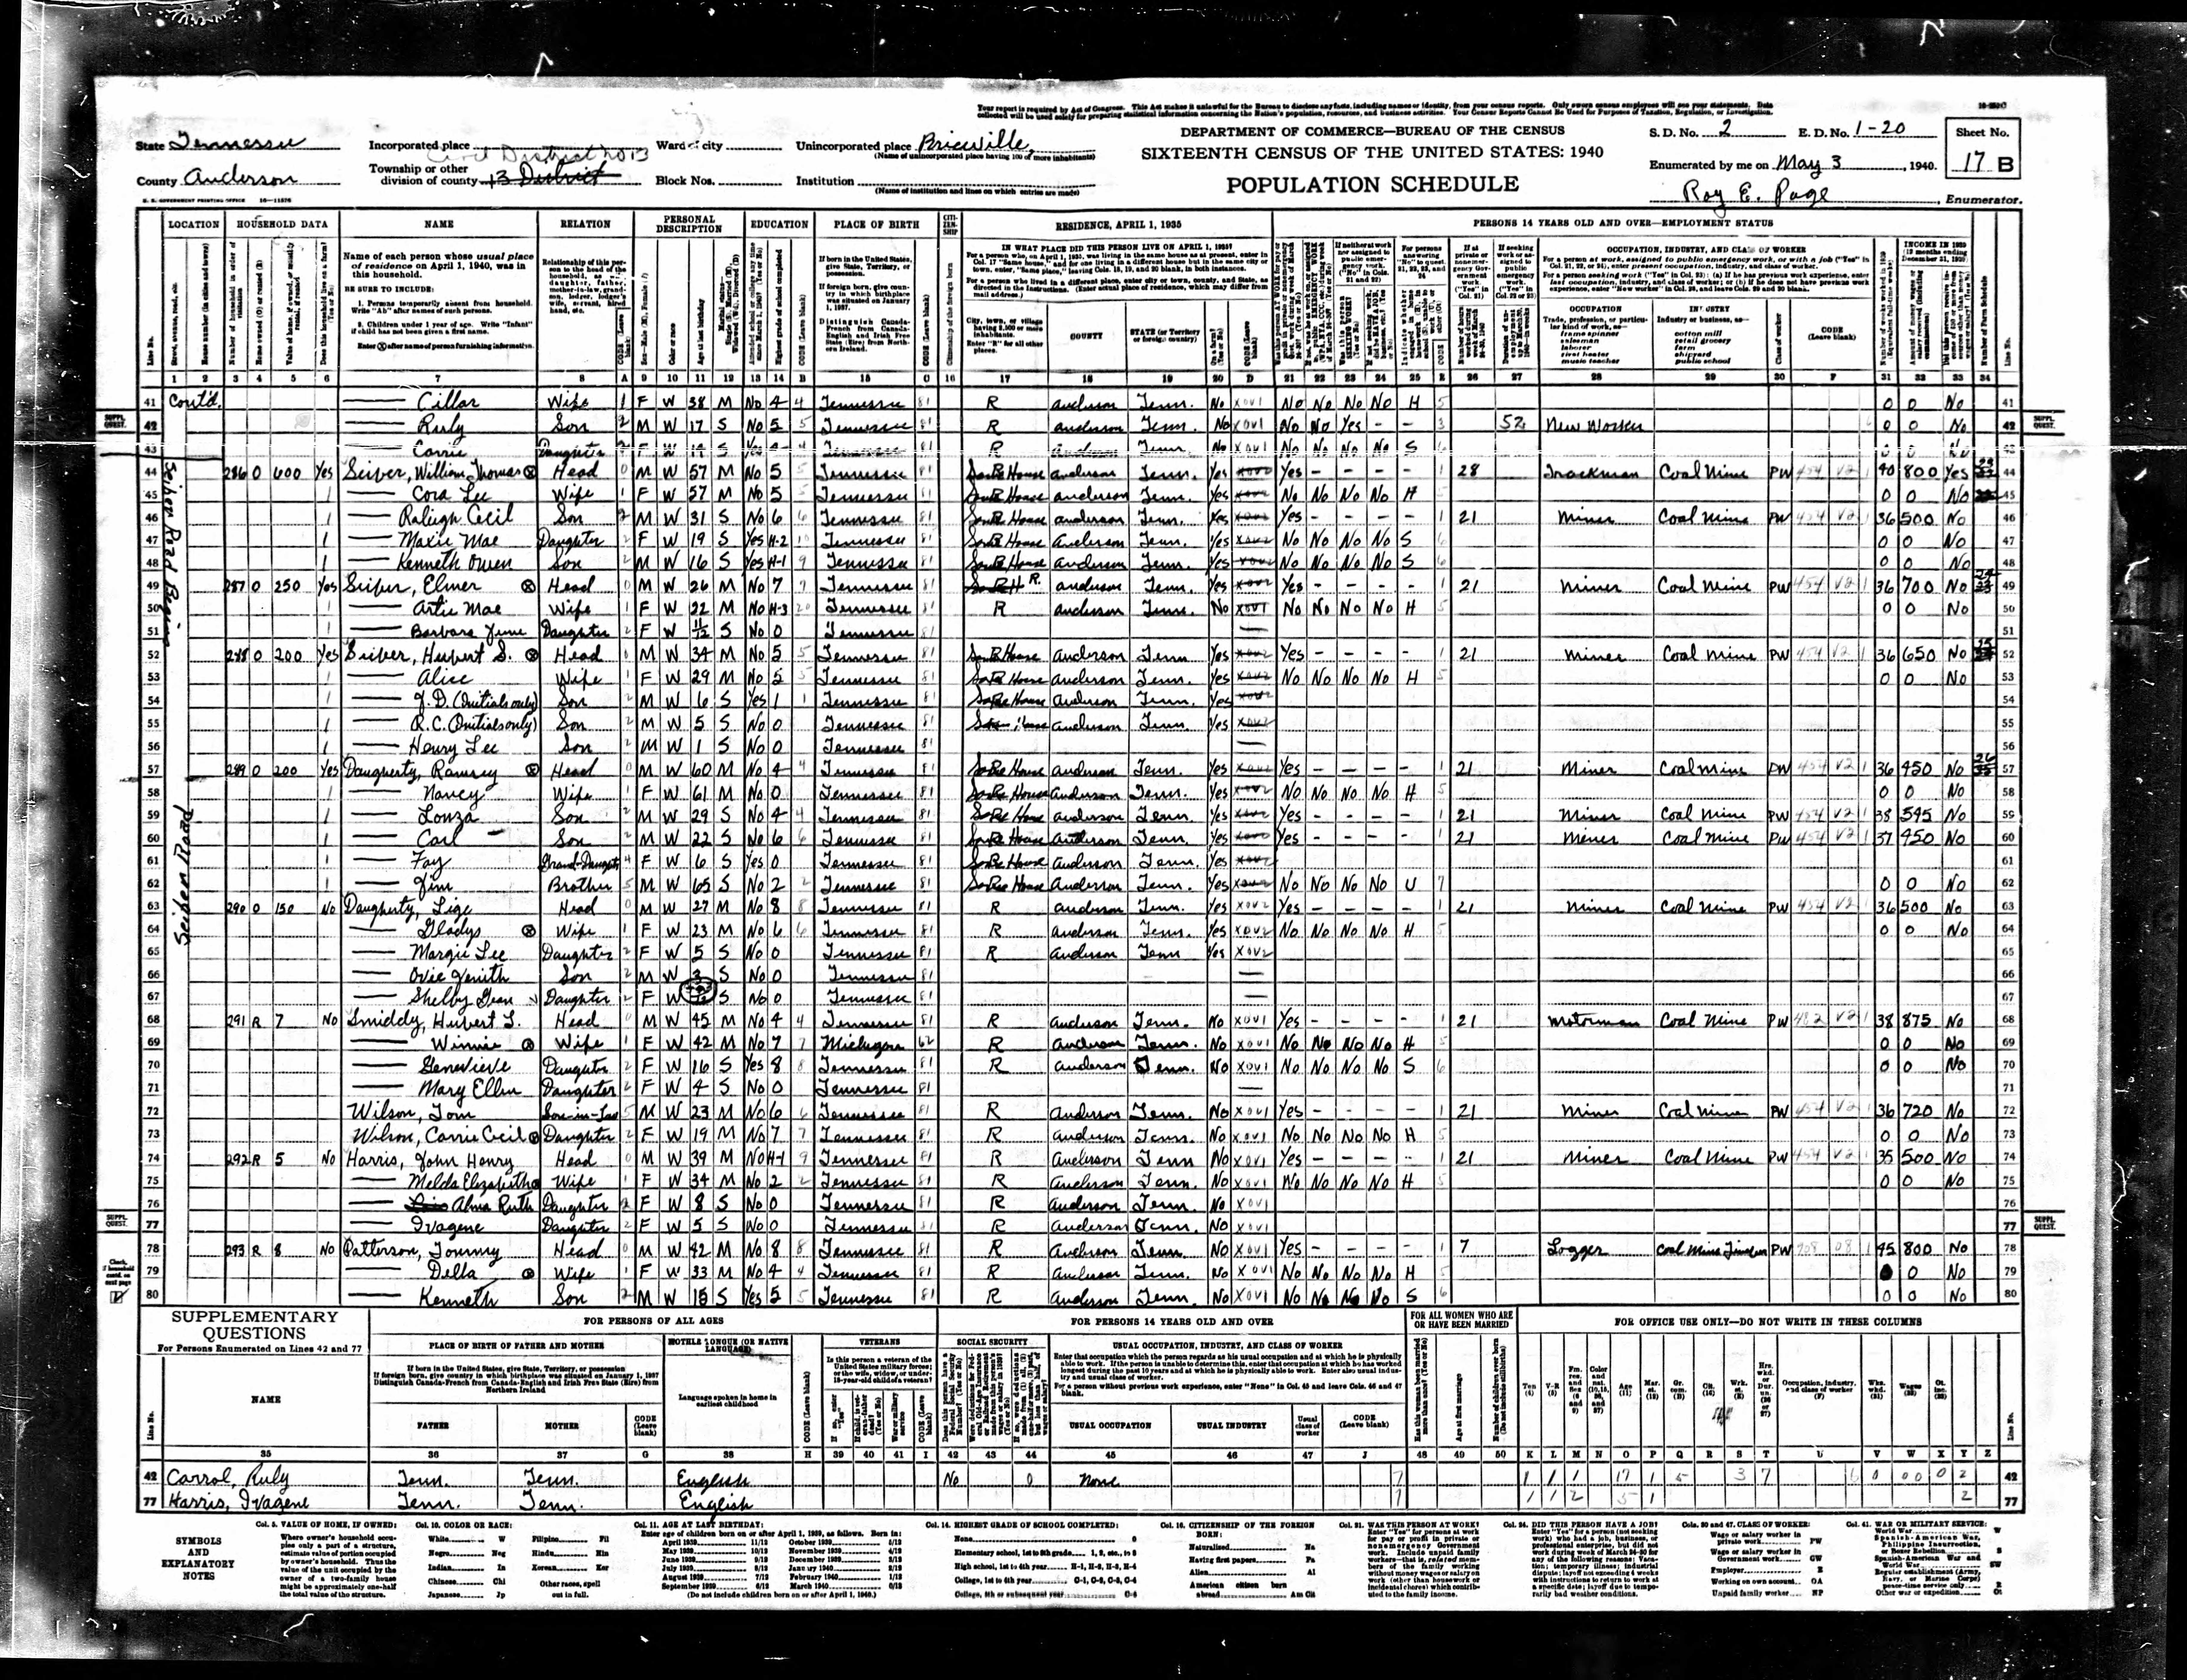 1940 U.S. Census, Anderson County, Tennessee, Dist. 13, page 333b